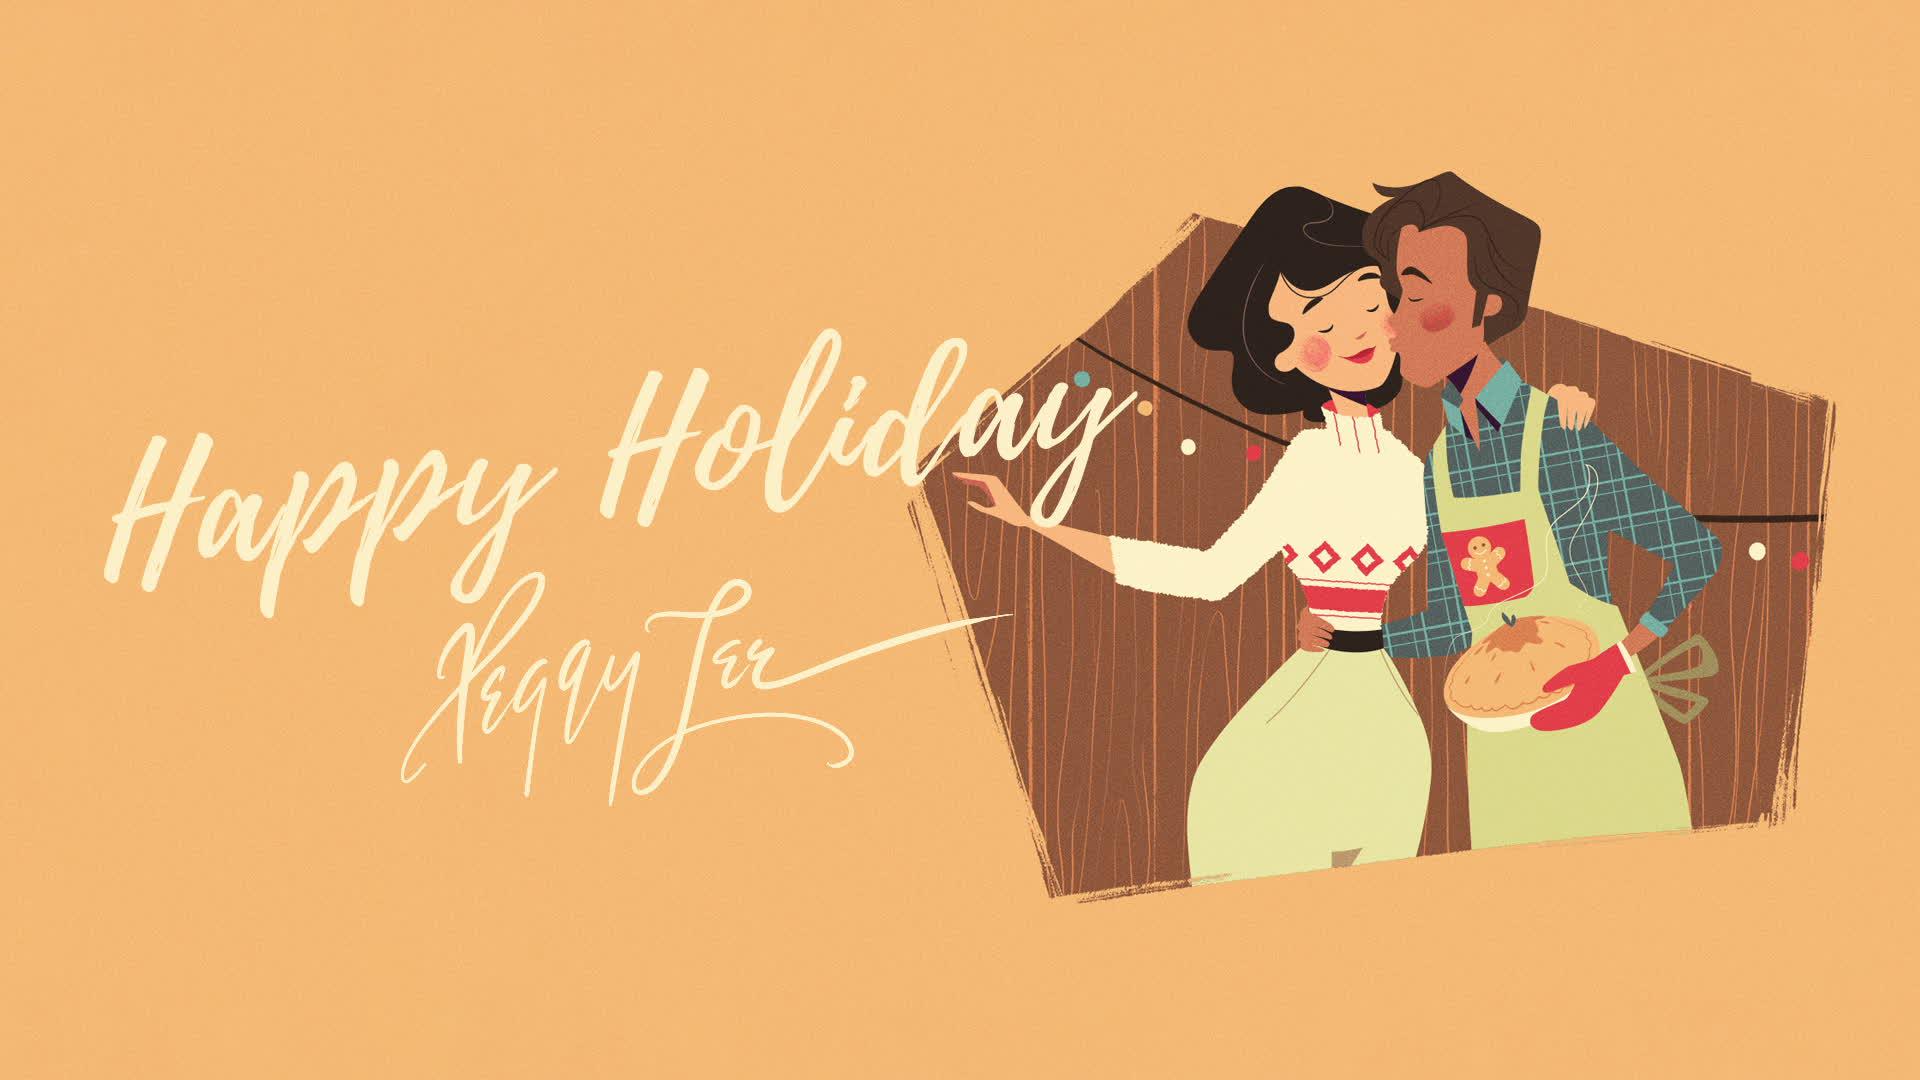 Peggy Lee - Happy Holiday (Audio)